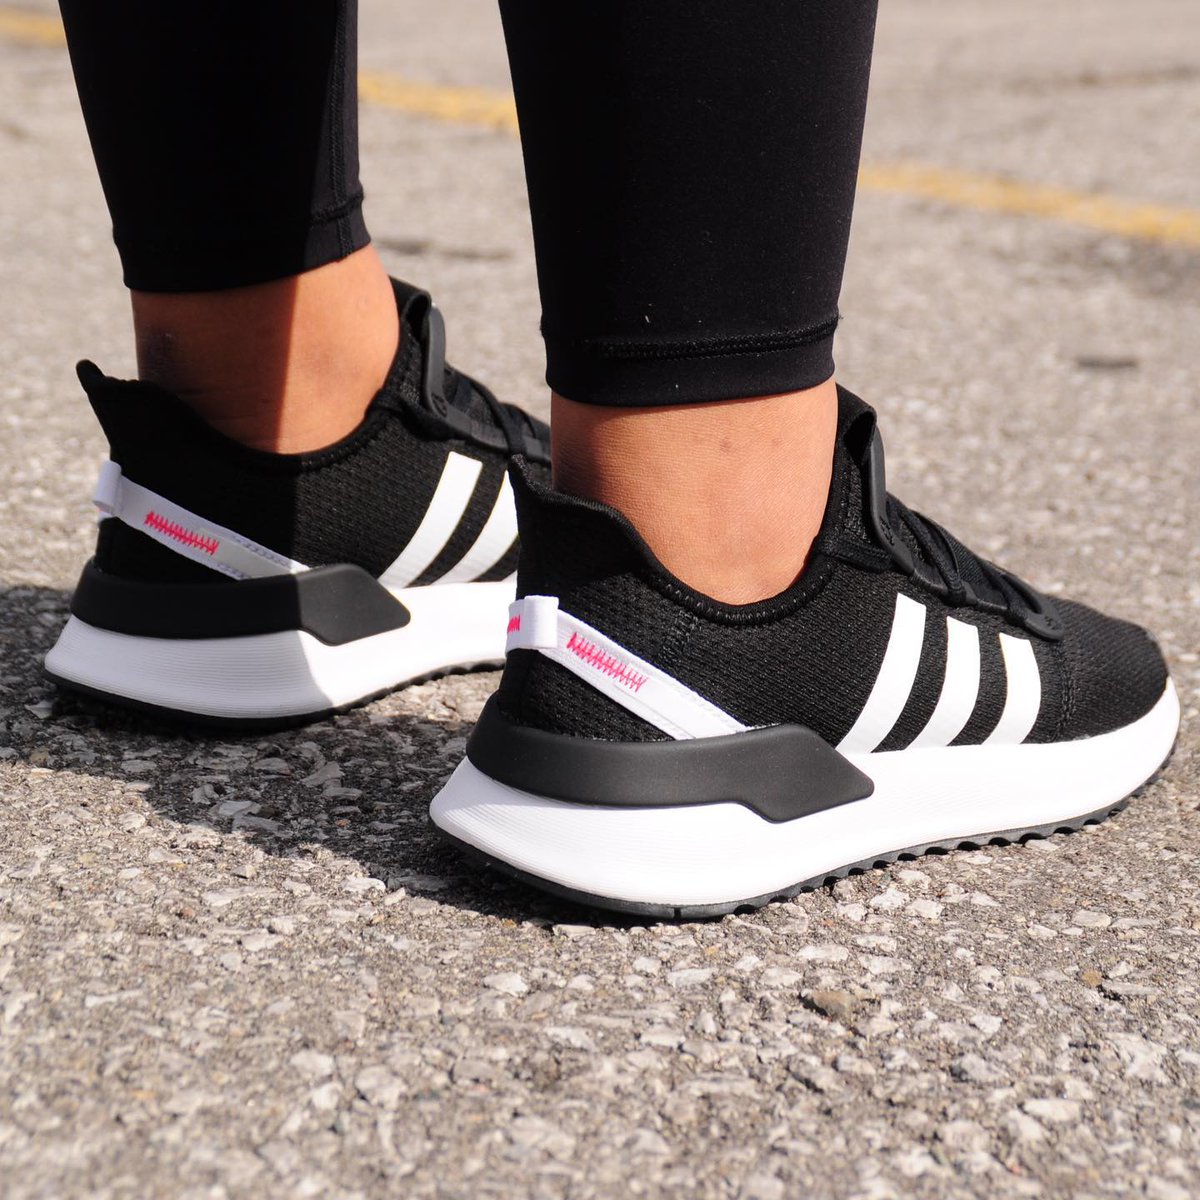 Twitter 上的 Closet Inc.："Fall 2019 Collection Womens Adidas U_Path X J “Black/White” G28108 $90.00 CAD Available in all store locations &amp; online https://t.co/VX72vYdwcS Free Canadian Shipping #TheClosetInc #TheClosetIncLondon #TeamCloset